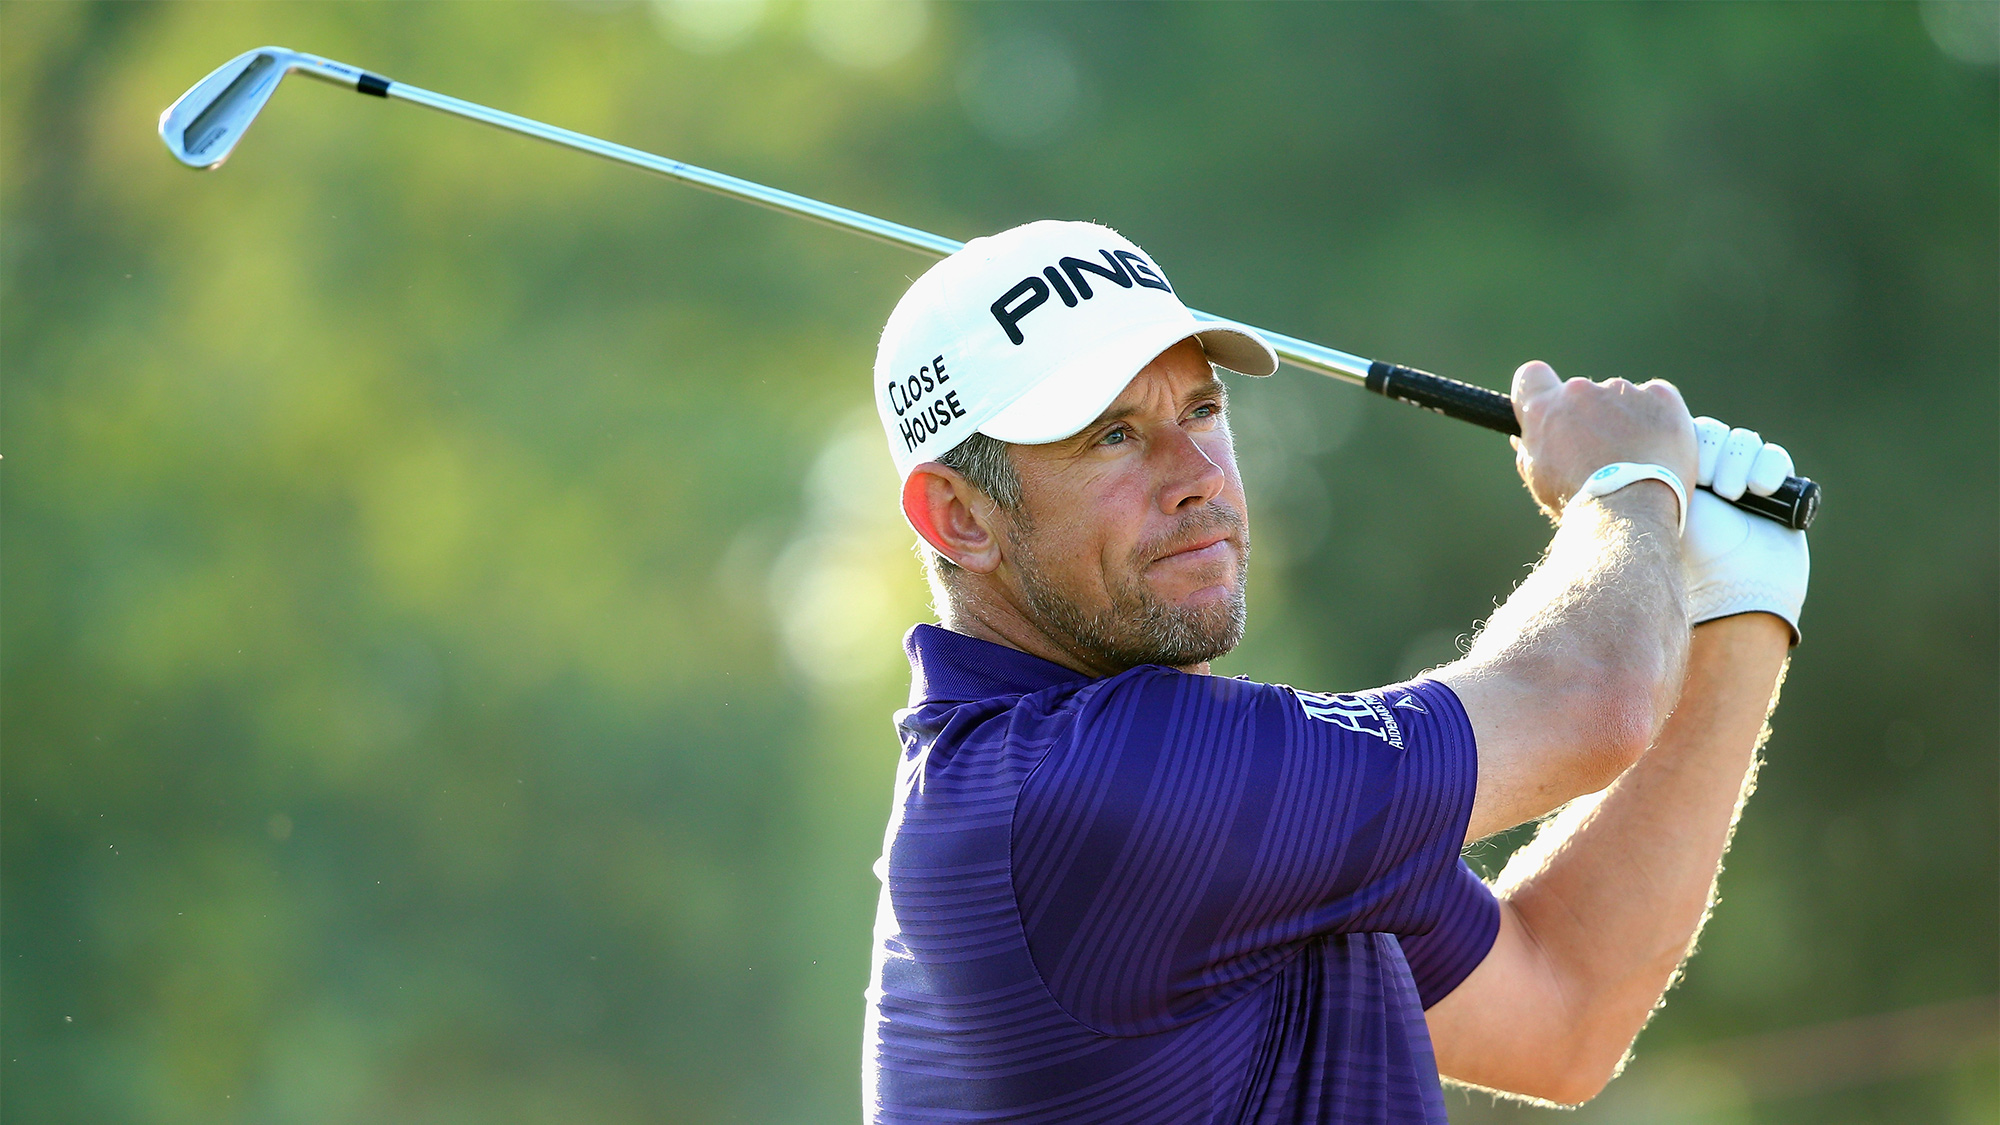 Lee Westwood's The Halfway-Horse At Players Championship